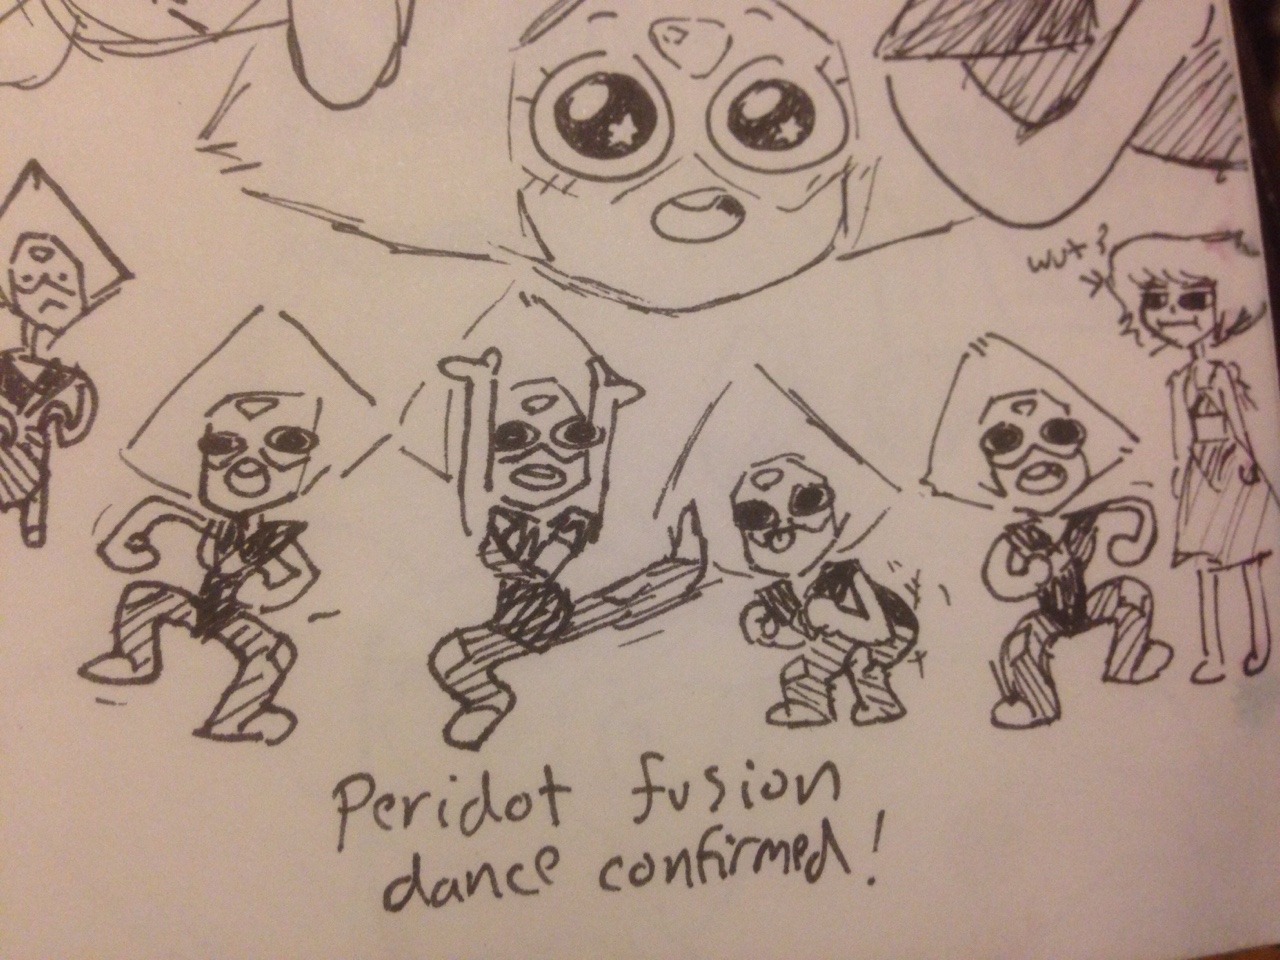 ~ Bonus sketch ~
The original, never-before-seen, Peridot fusion dance sketches! I’m pretty sure I didn’t think for one second while I drew this that I’d animate it months later and it would be one of the most popular post on this blog. It has gotten...